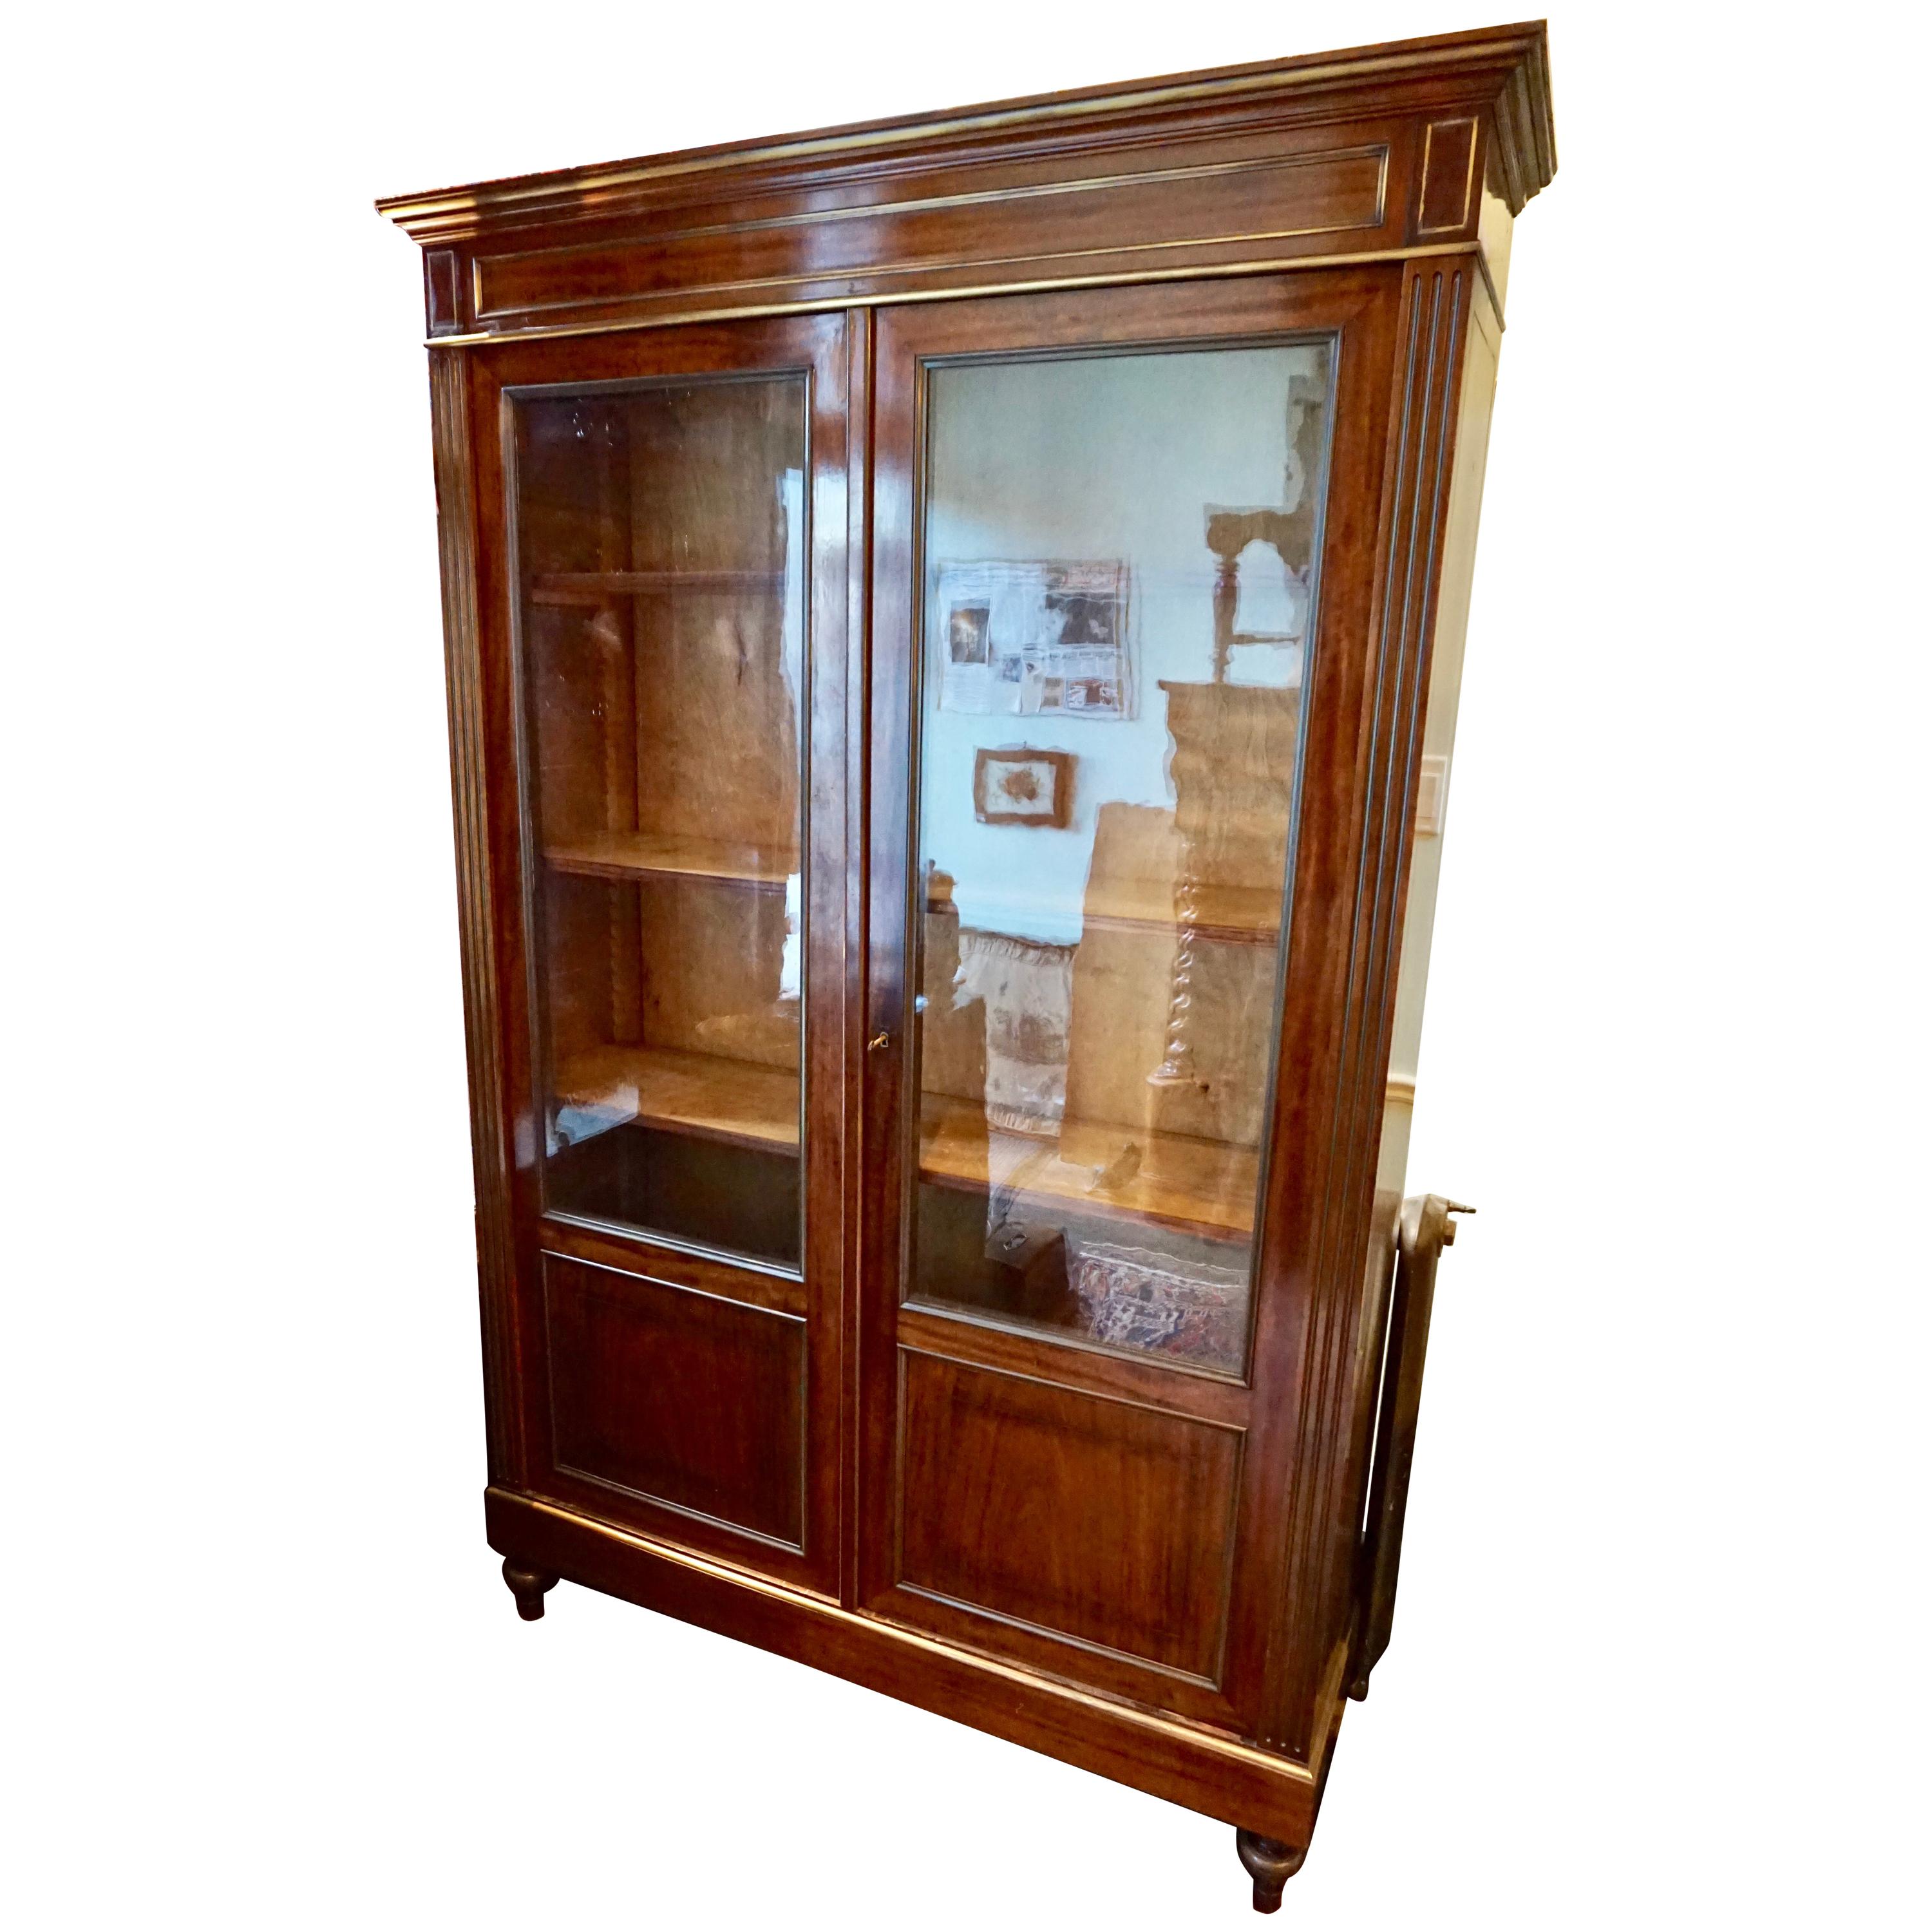 Circa 1850-60

Handsomely designed solid Mahogany Cabinet with Brass Inlay and surround. Beautiful patina, details and finesse abound this magnificent high quality bookcase cum showcase curio cabinet. Sits on bun feet. Adjustable shelves. Back